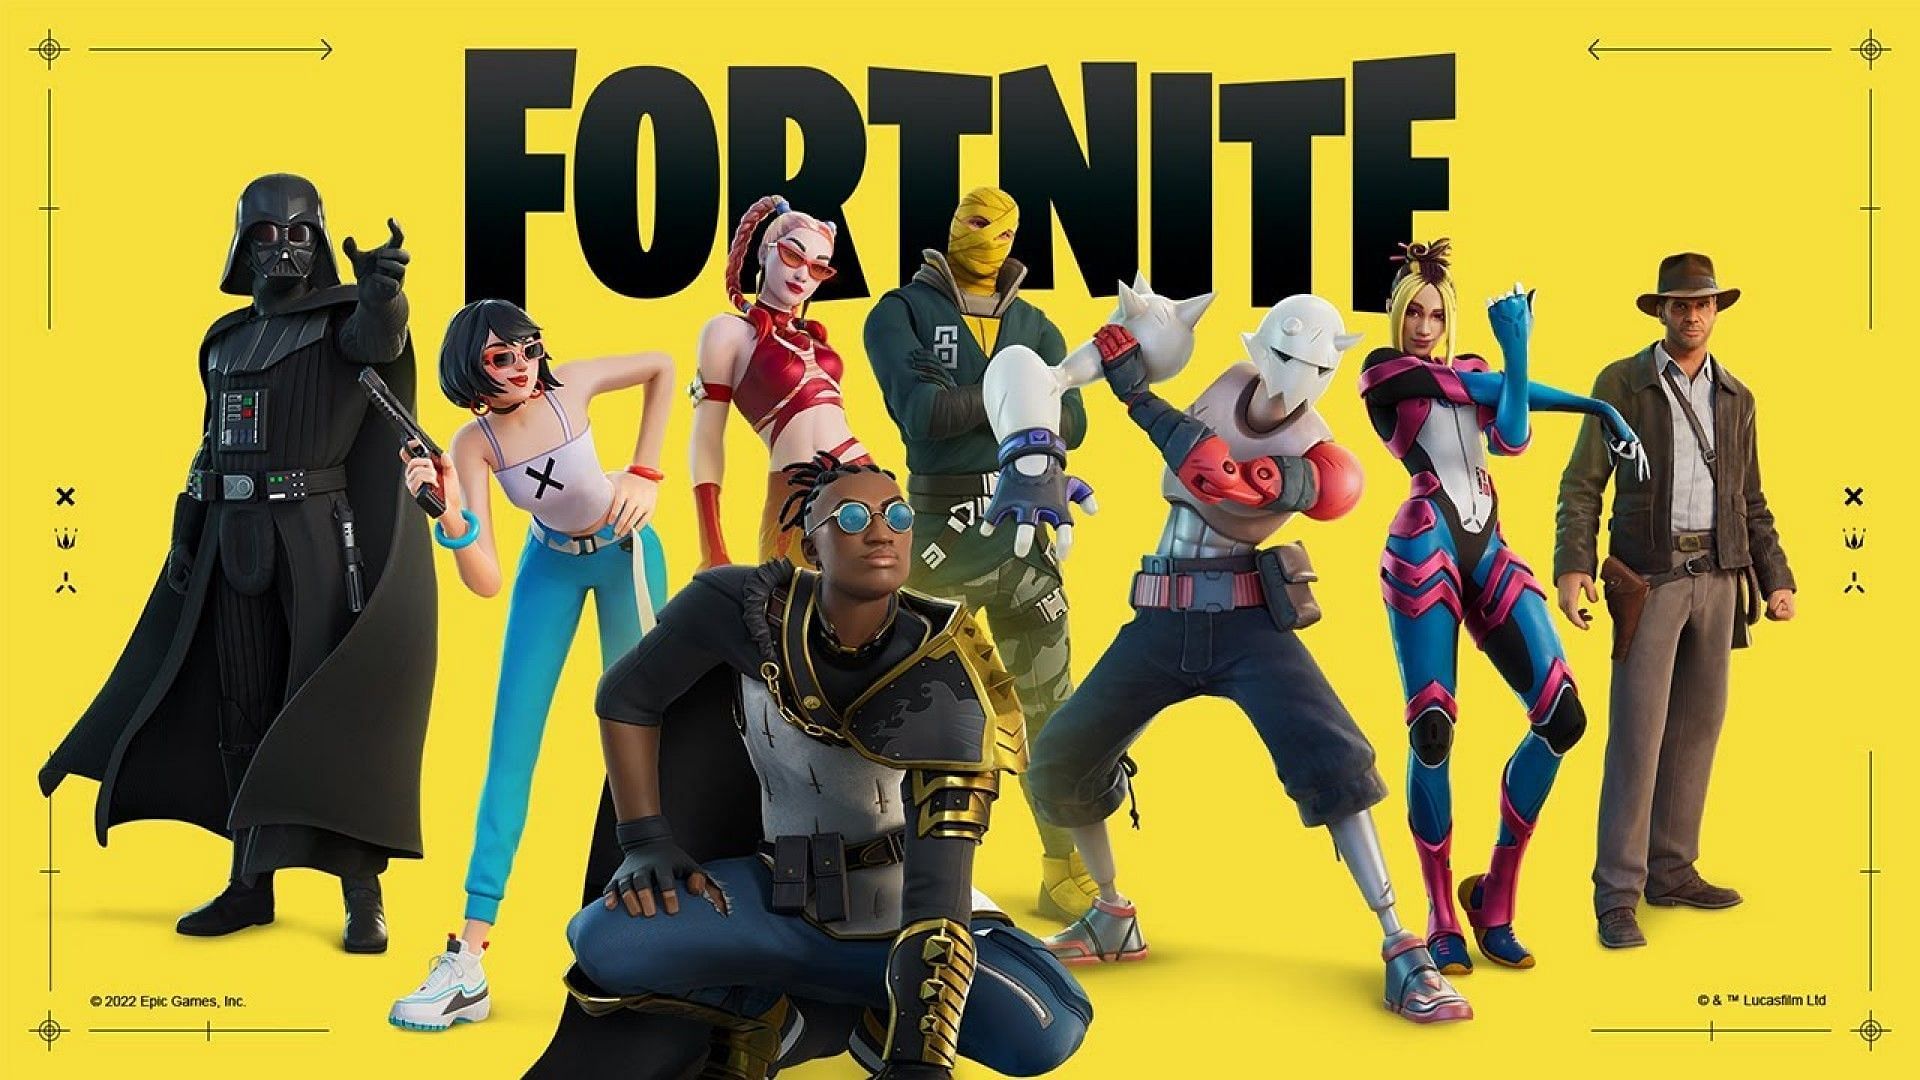 Party Star Fortnite Wallpapers